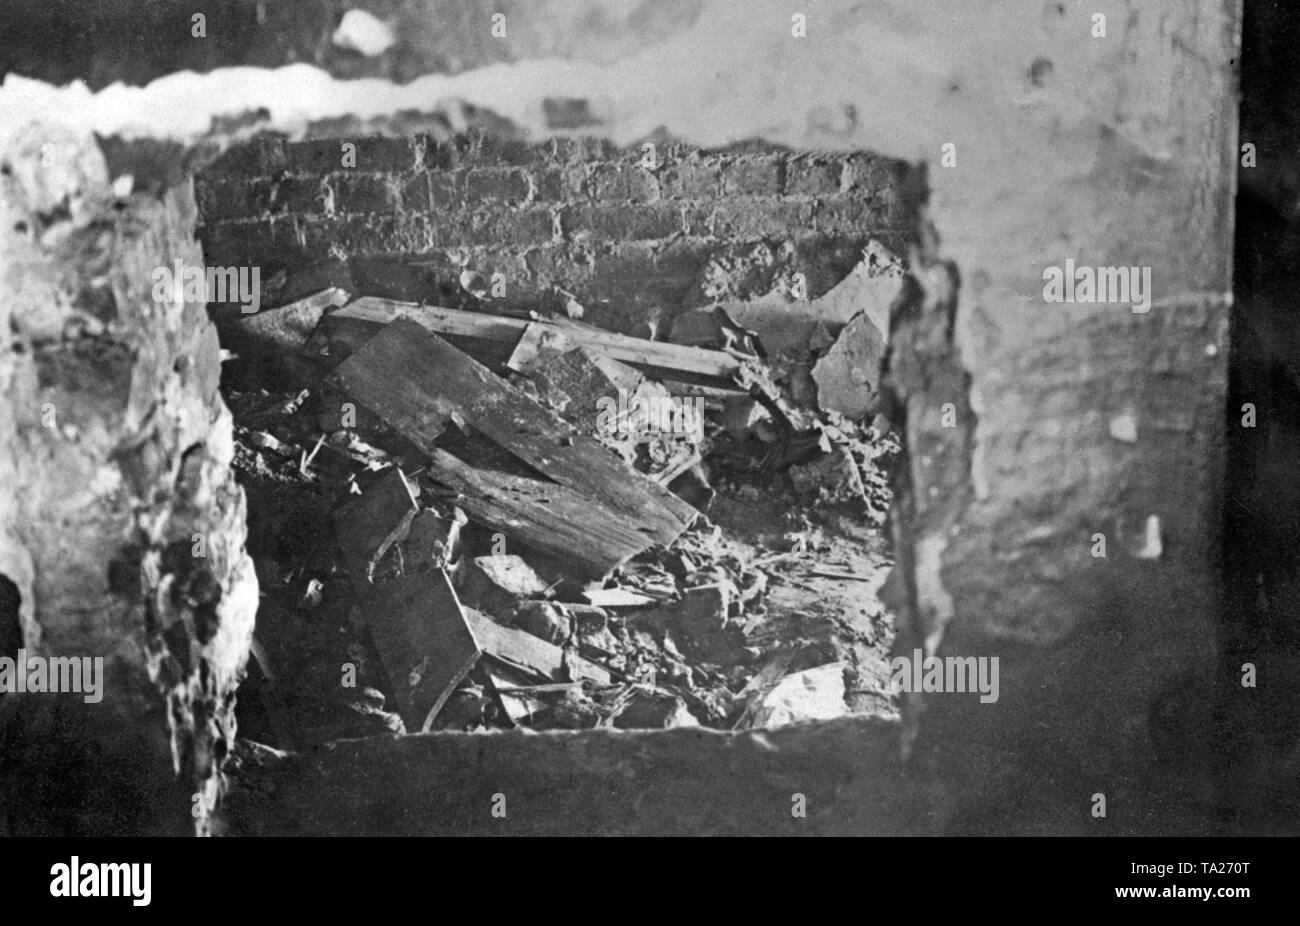 The brick hiding place in which jewelry and jewels worth 50 million rubles had been hidden around 1917. The treasure was discovered and taken away only in 1925. Stock Photo